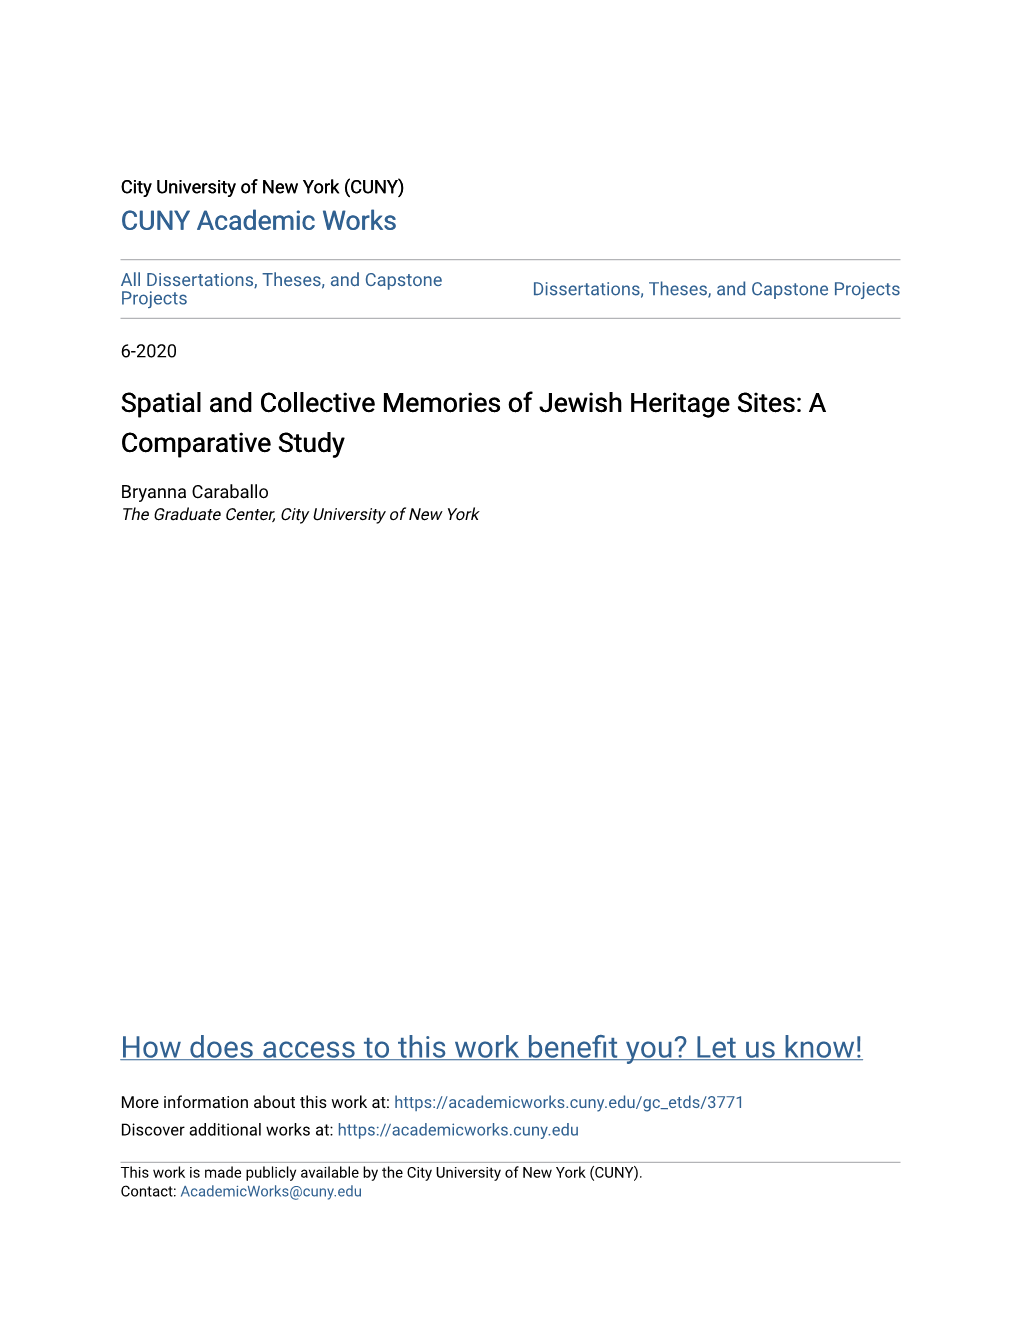 Spatial and Collective Memories of Jewish Heritage Sites: a Comparative Study